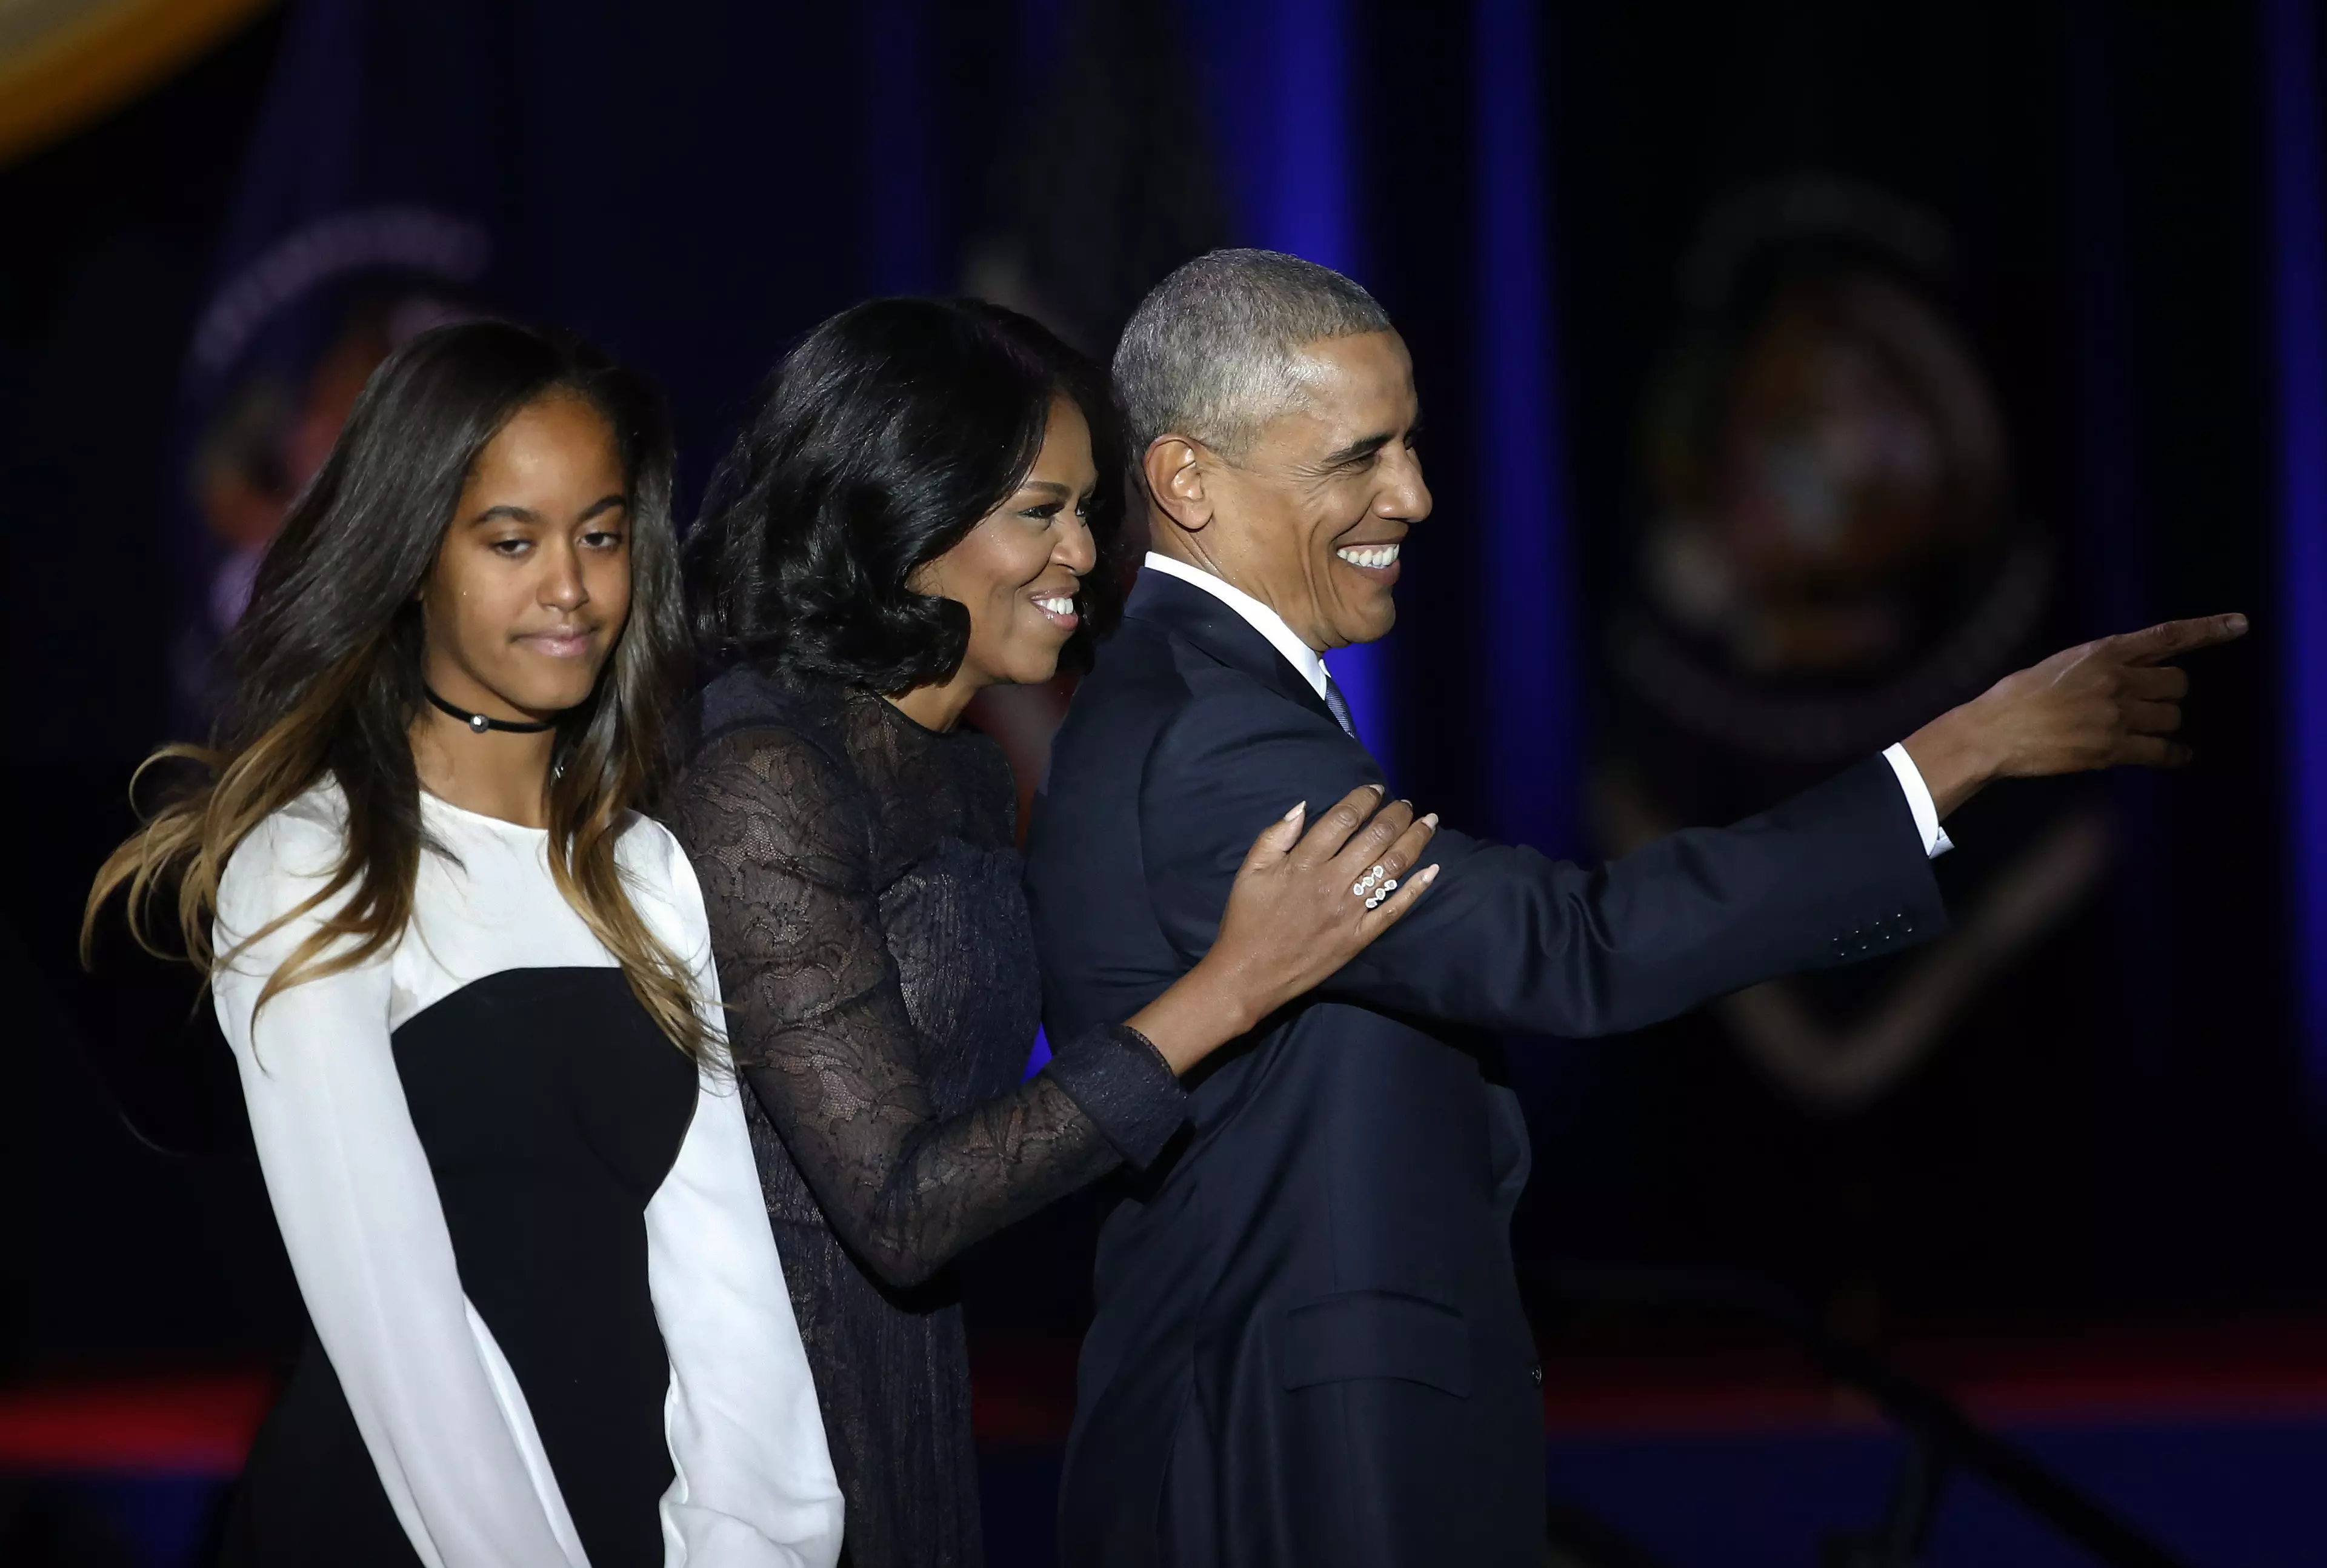 President Obama Pays Tribute To His Family In His Emotional Farewell Speech